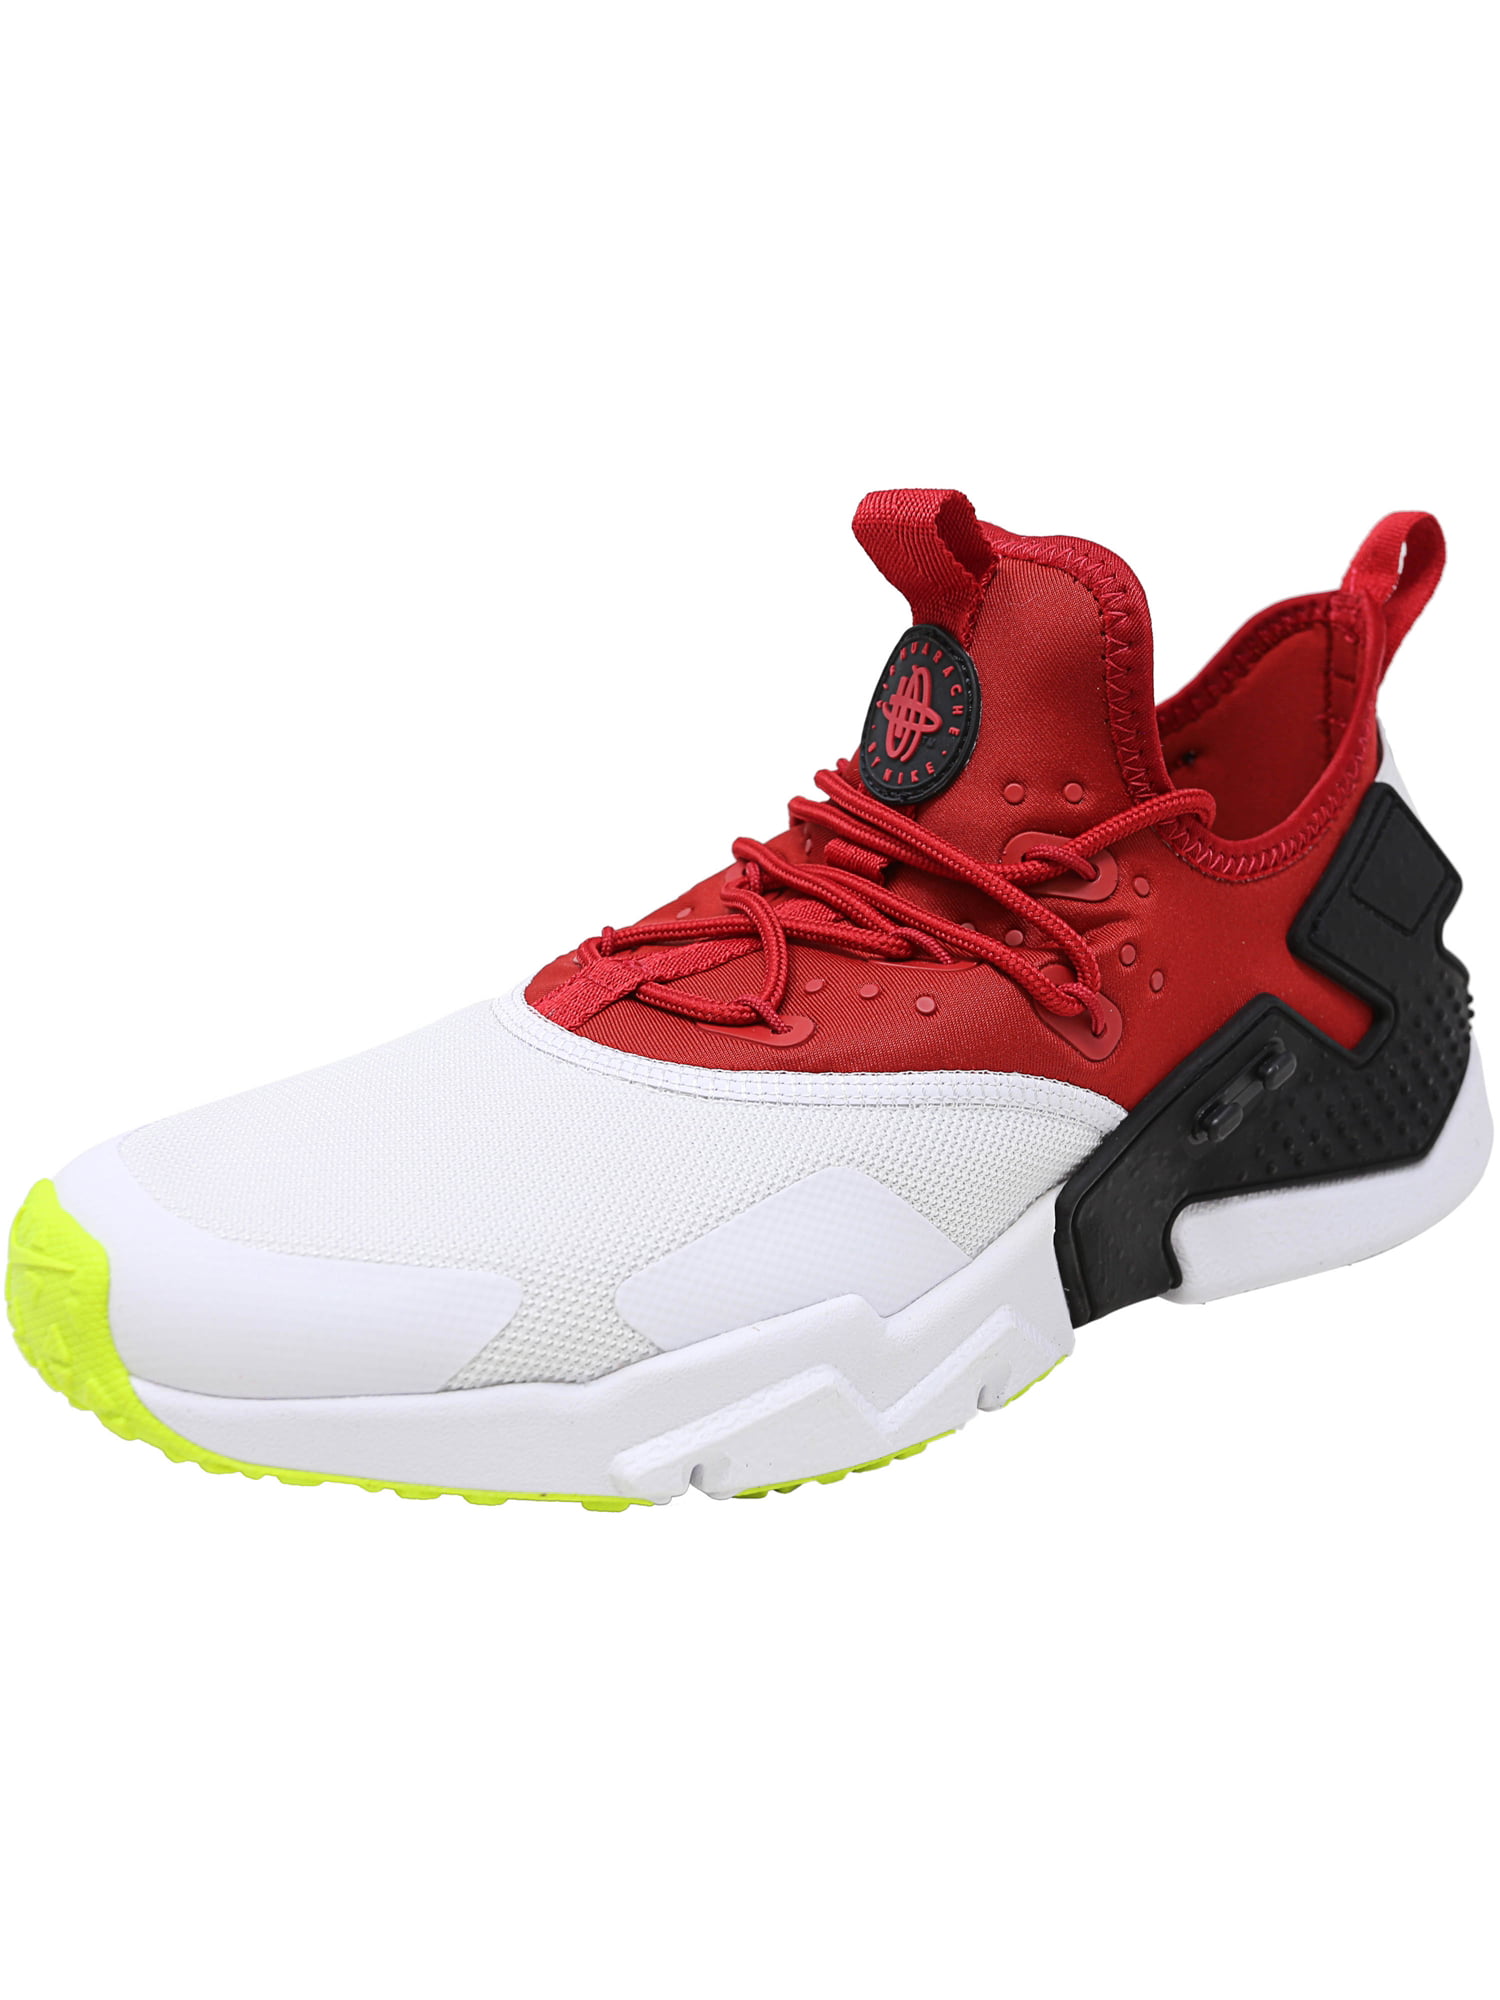 red huaraches outfit